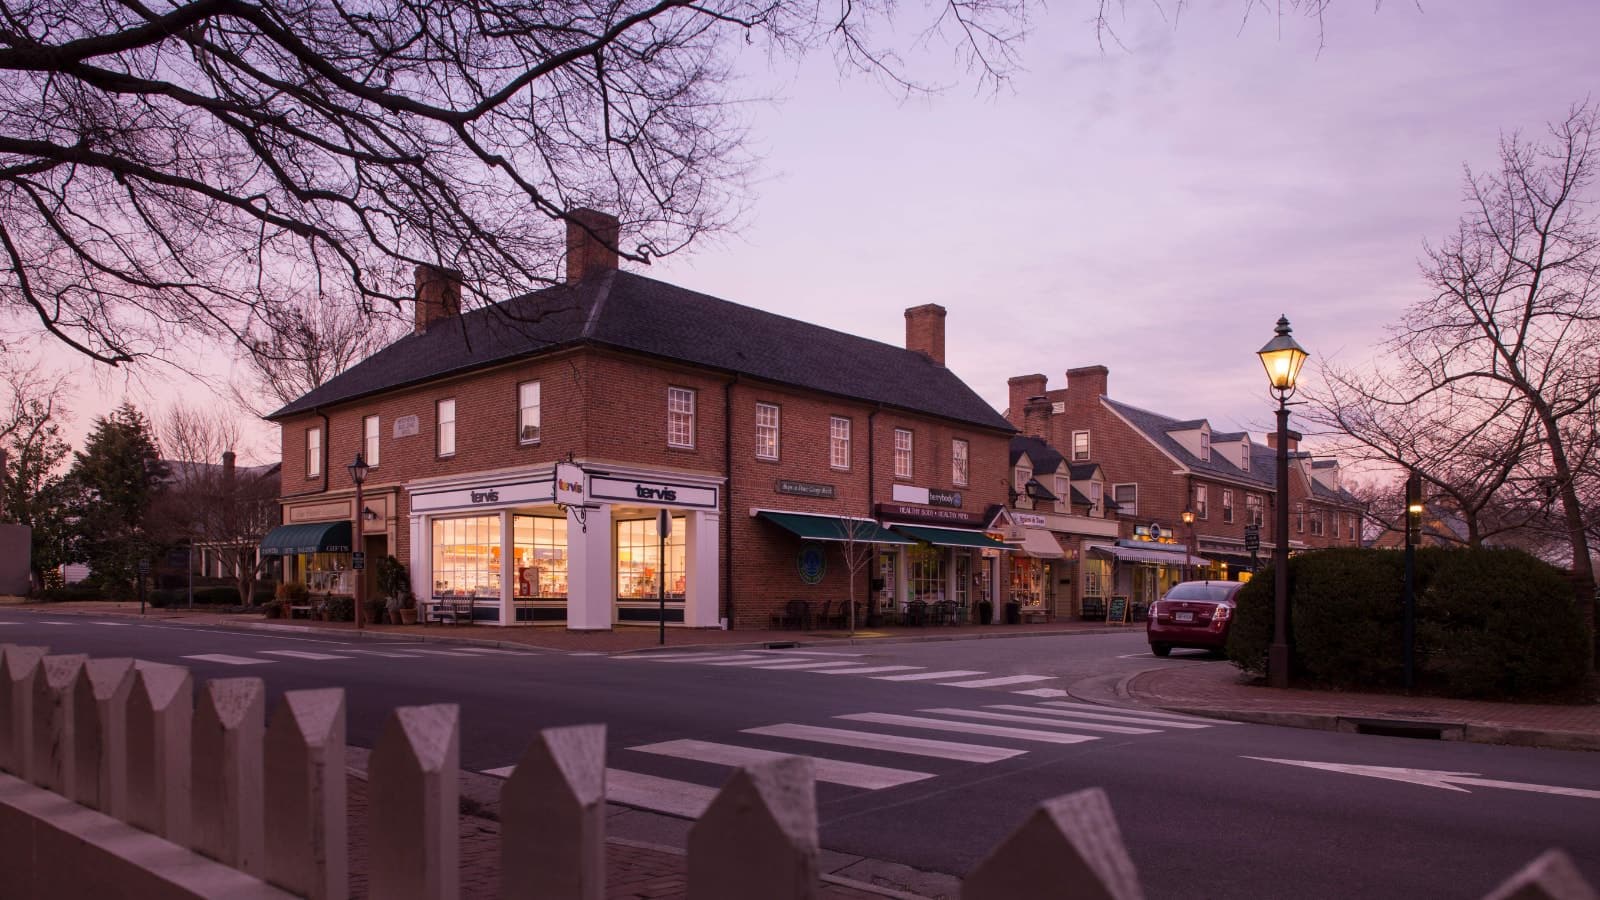 Exterior view of property with brown brick and light trim in a historic downtown area at dusk